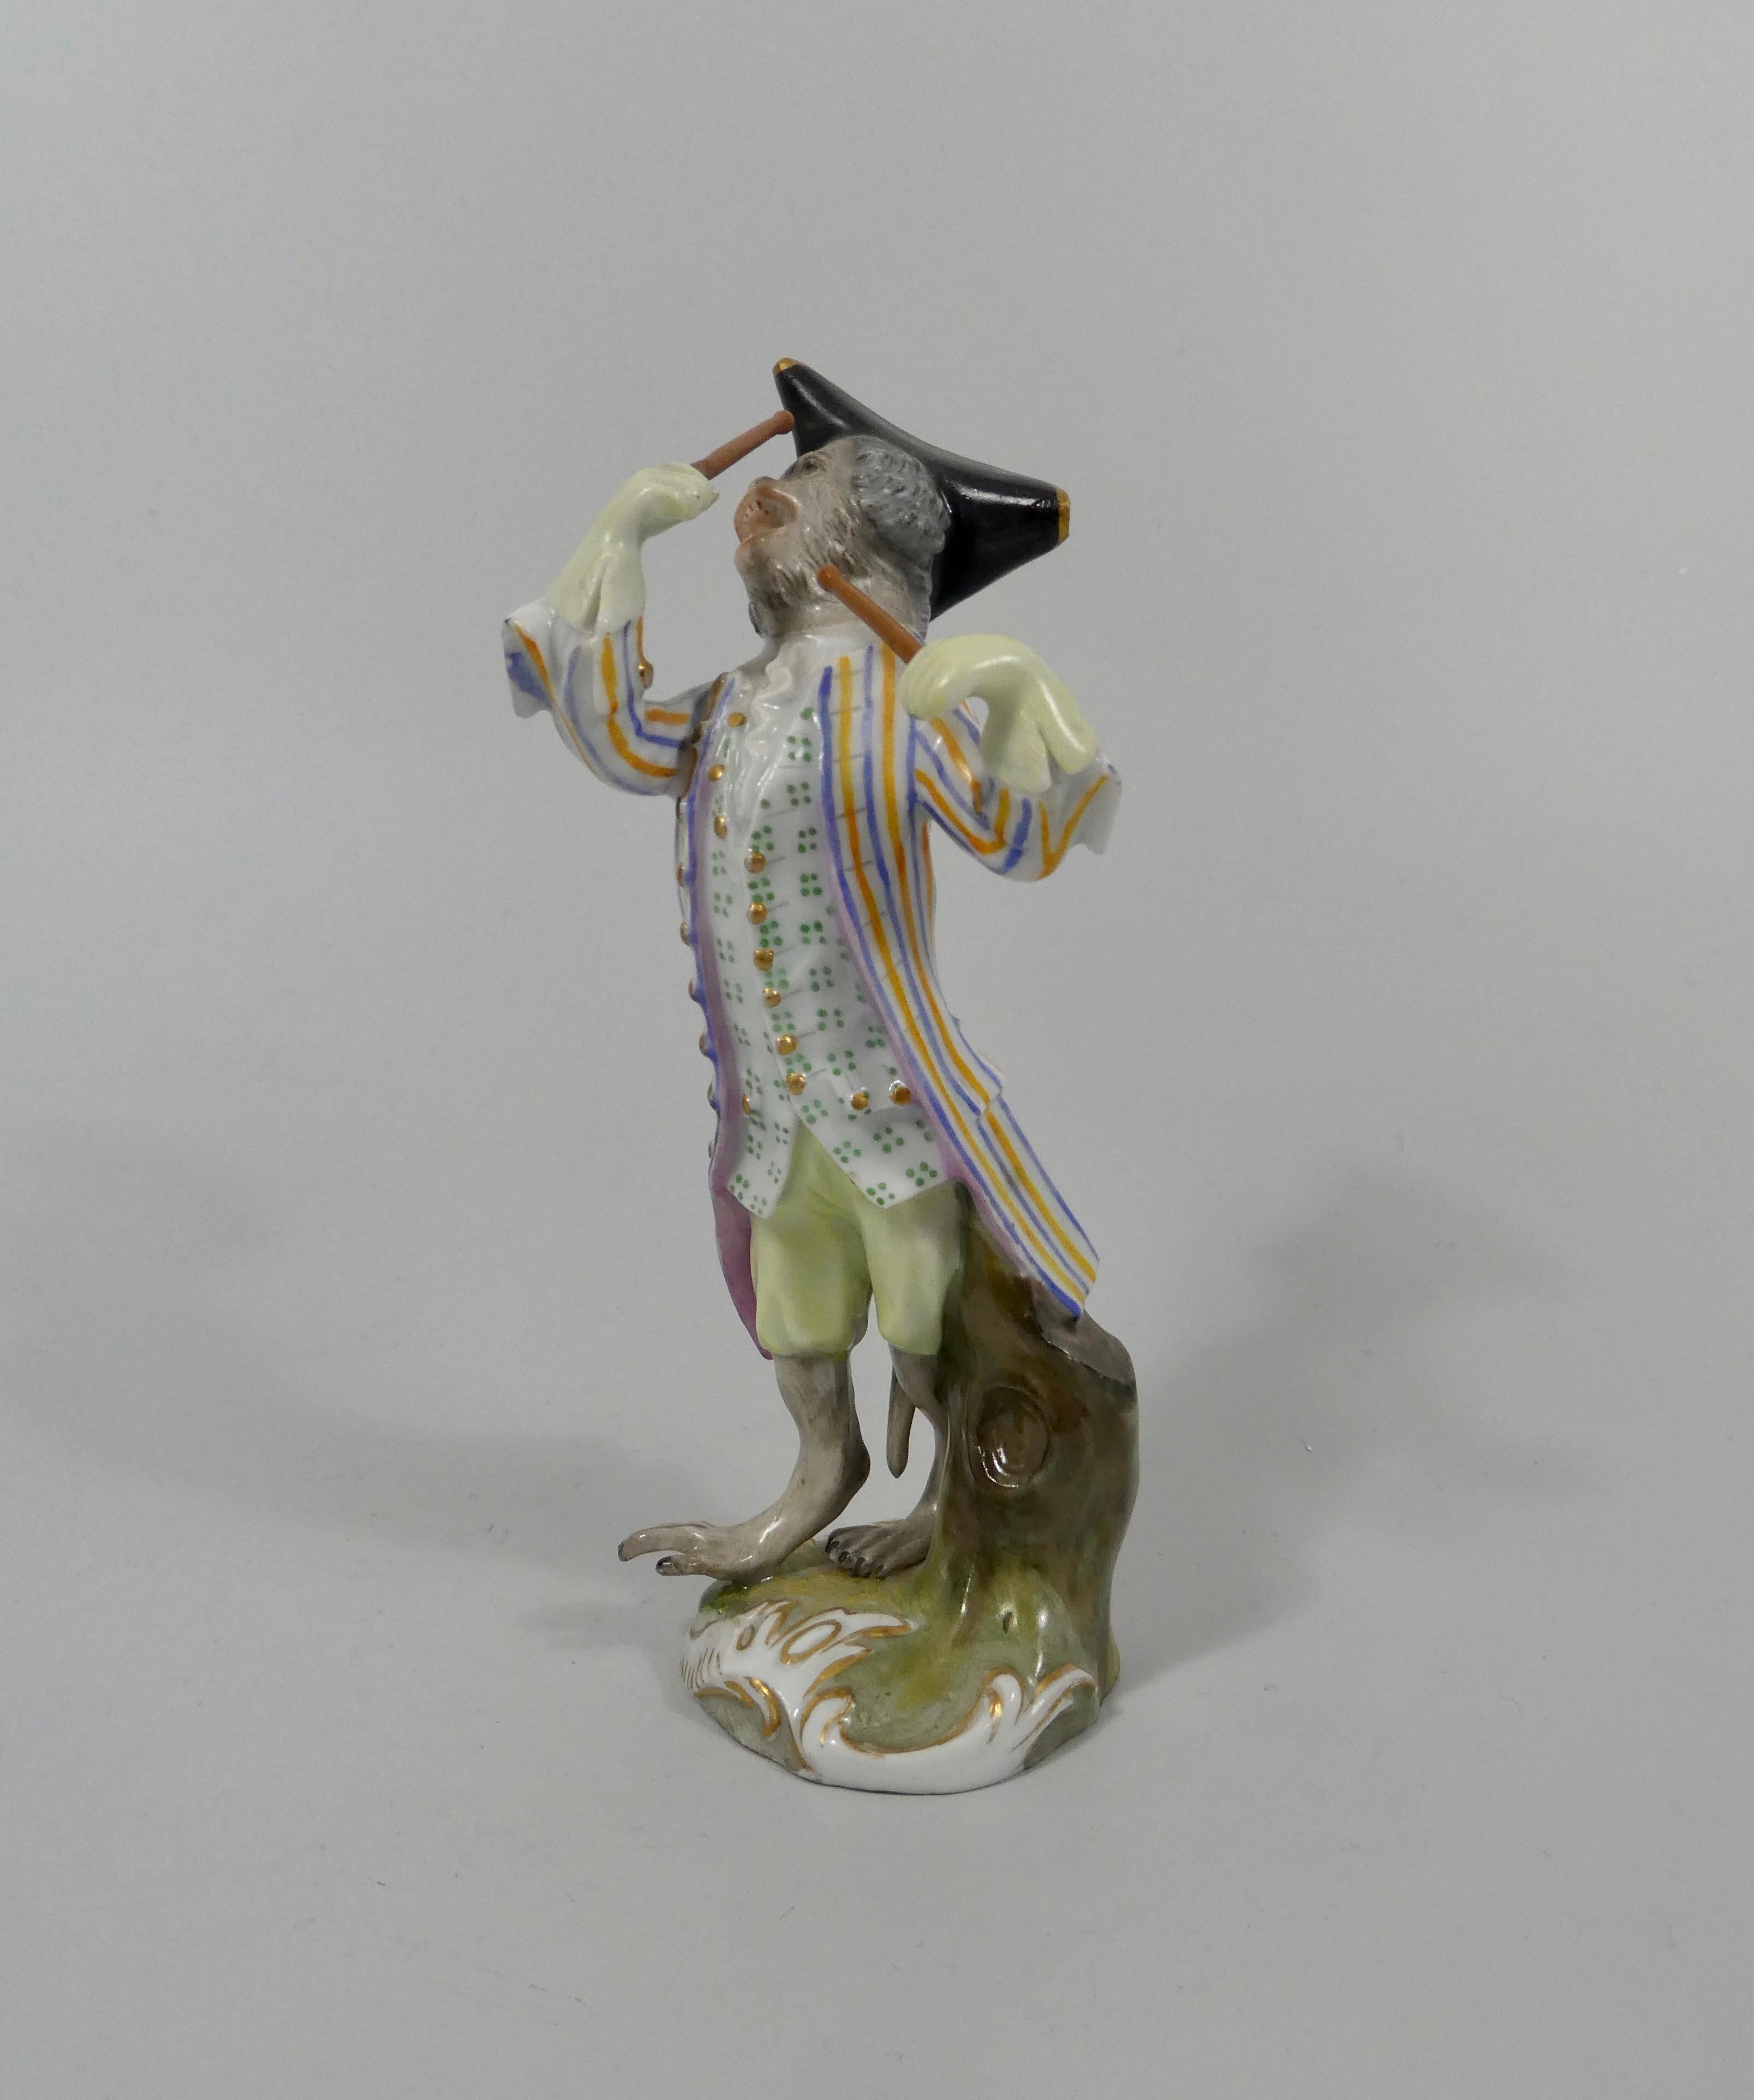 A fine Meissen porcelain figure, circa 1870. Beautifully modelled as a standing monkey wearing 18th century costume, and wielding drum sticks. Set upon a grassy mound base, edged and gilded in moulded rococo scroll,
Blue crossed swords mark to the